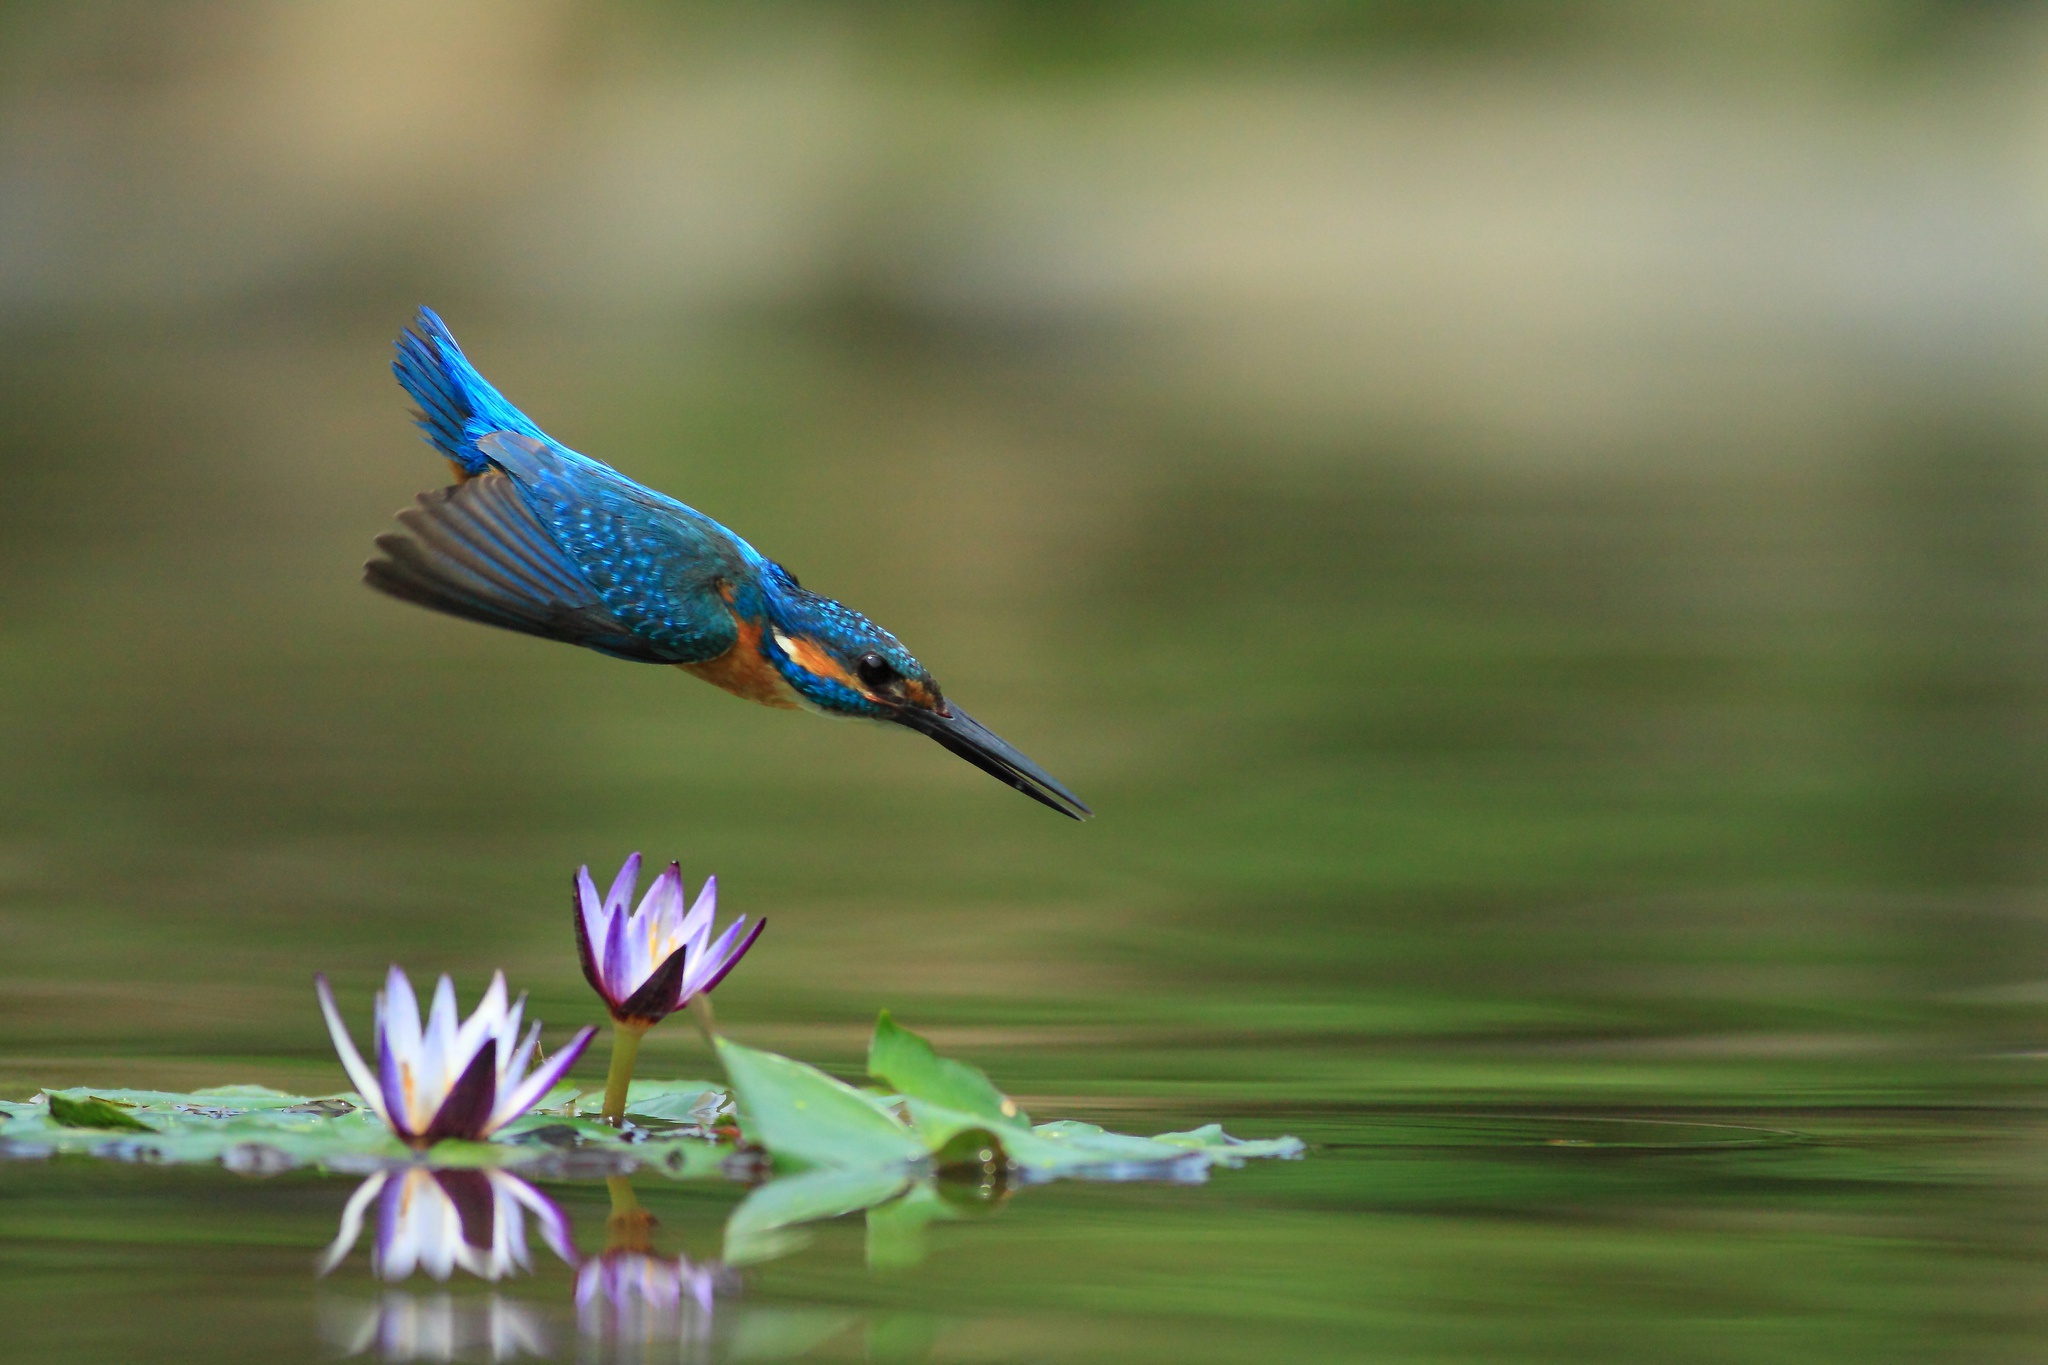 General 2048x1365 nature animals birds kingfisher water lilies closeup blurred blurry background water